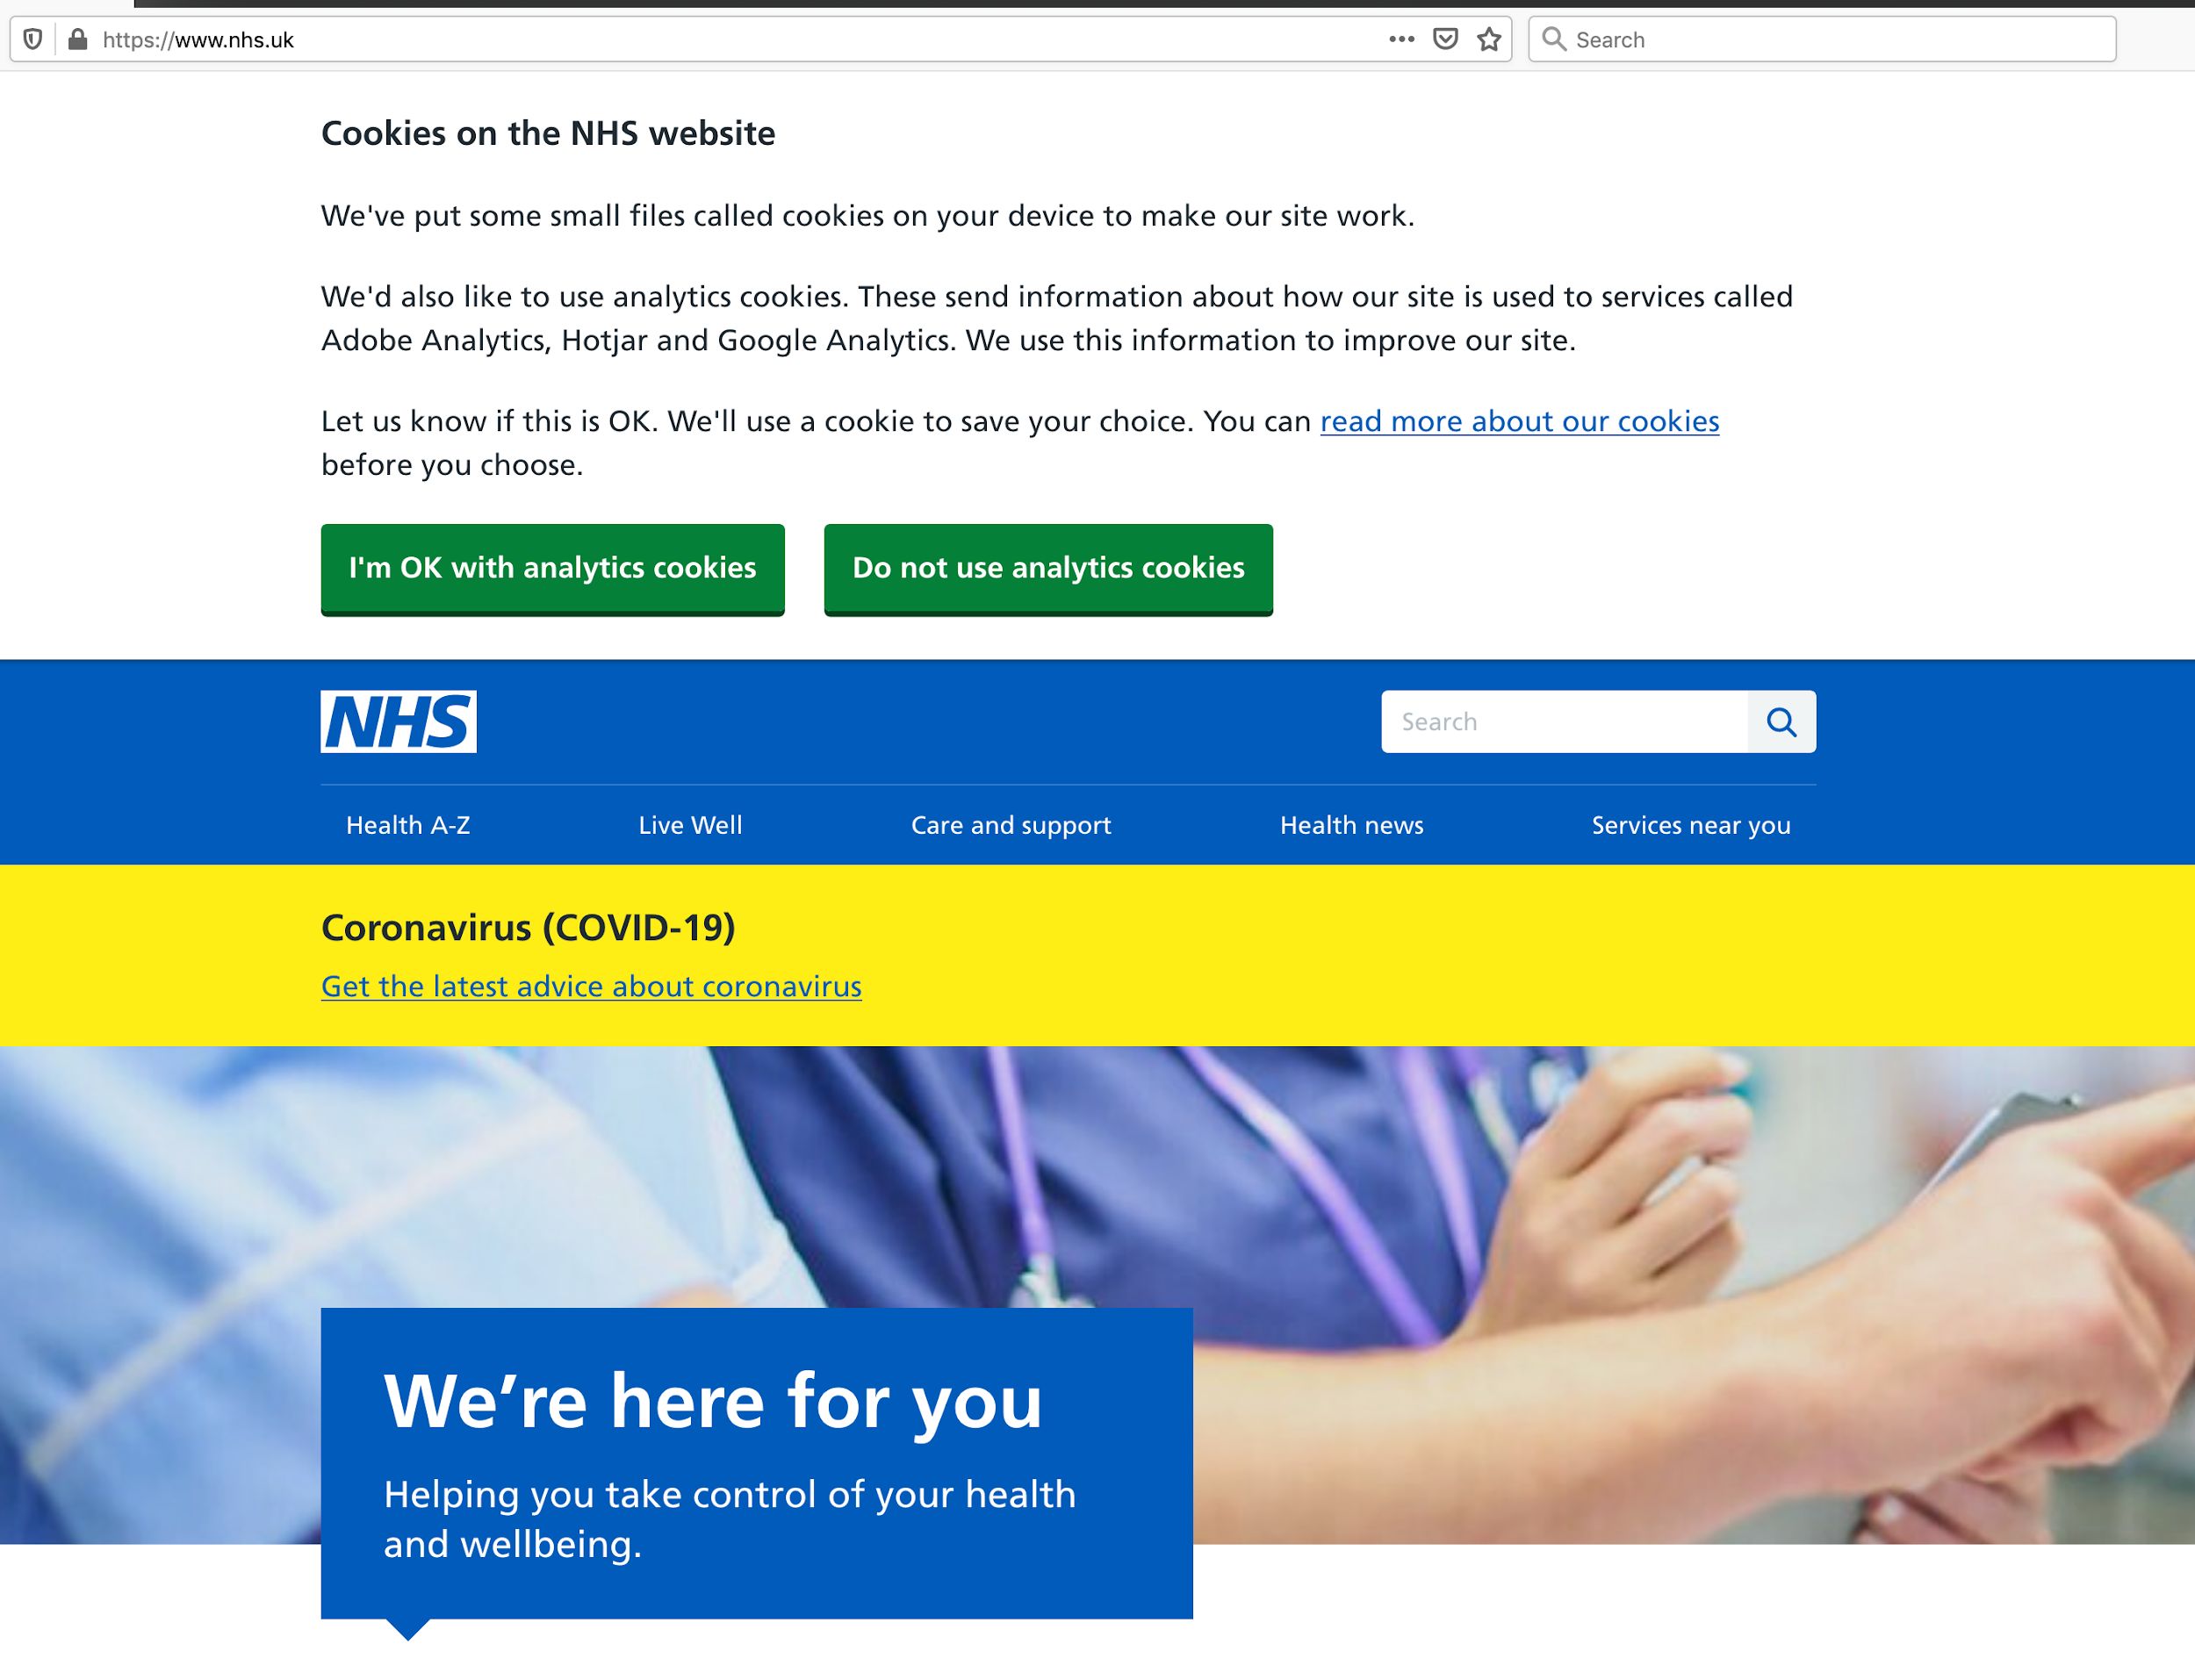 Cookies consent banner on the NHS website.